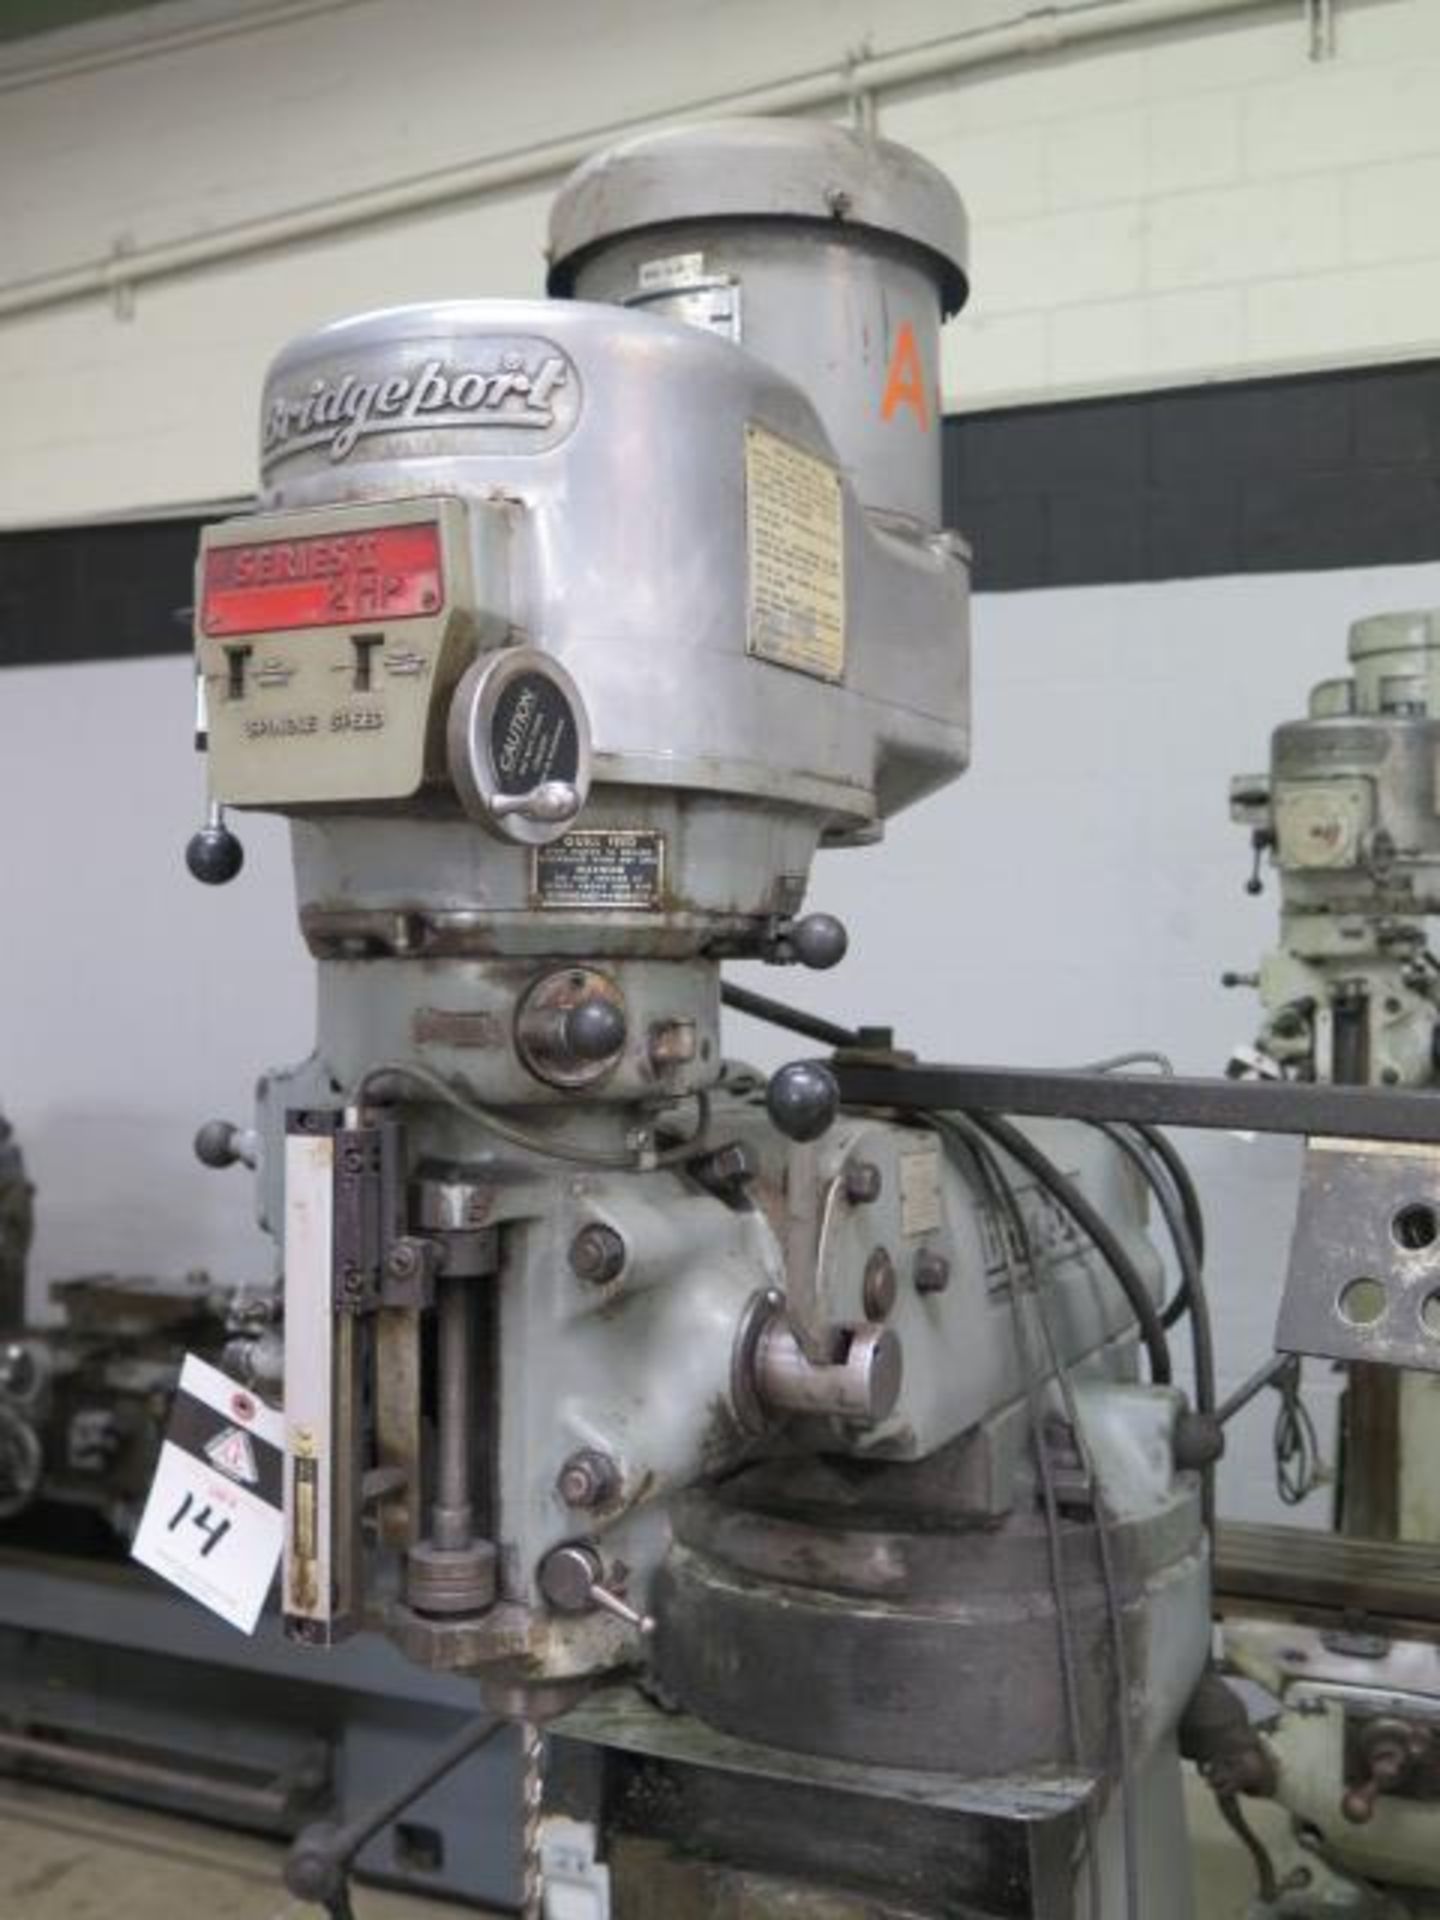 Bridgeport Series 1 – 2Hp Vertical Mill w/ Sargon 3-Axis DRO, 60-4200 Dial RPM, SOLD AS IS - Image 5 of 12